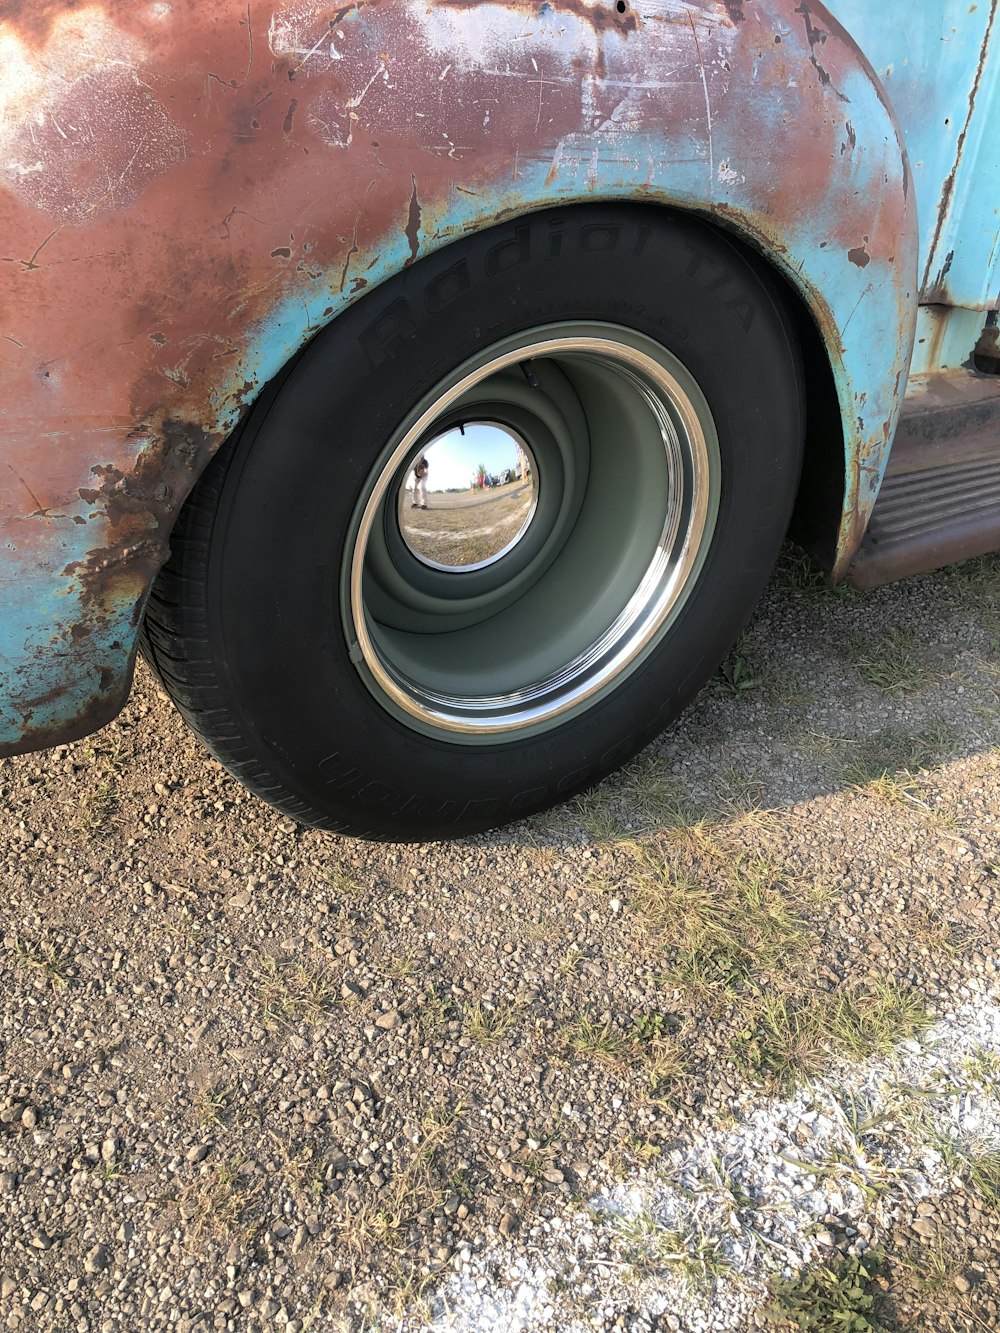 a tire on a red car